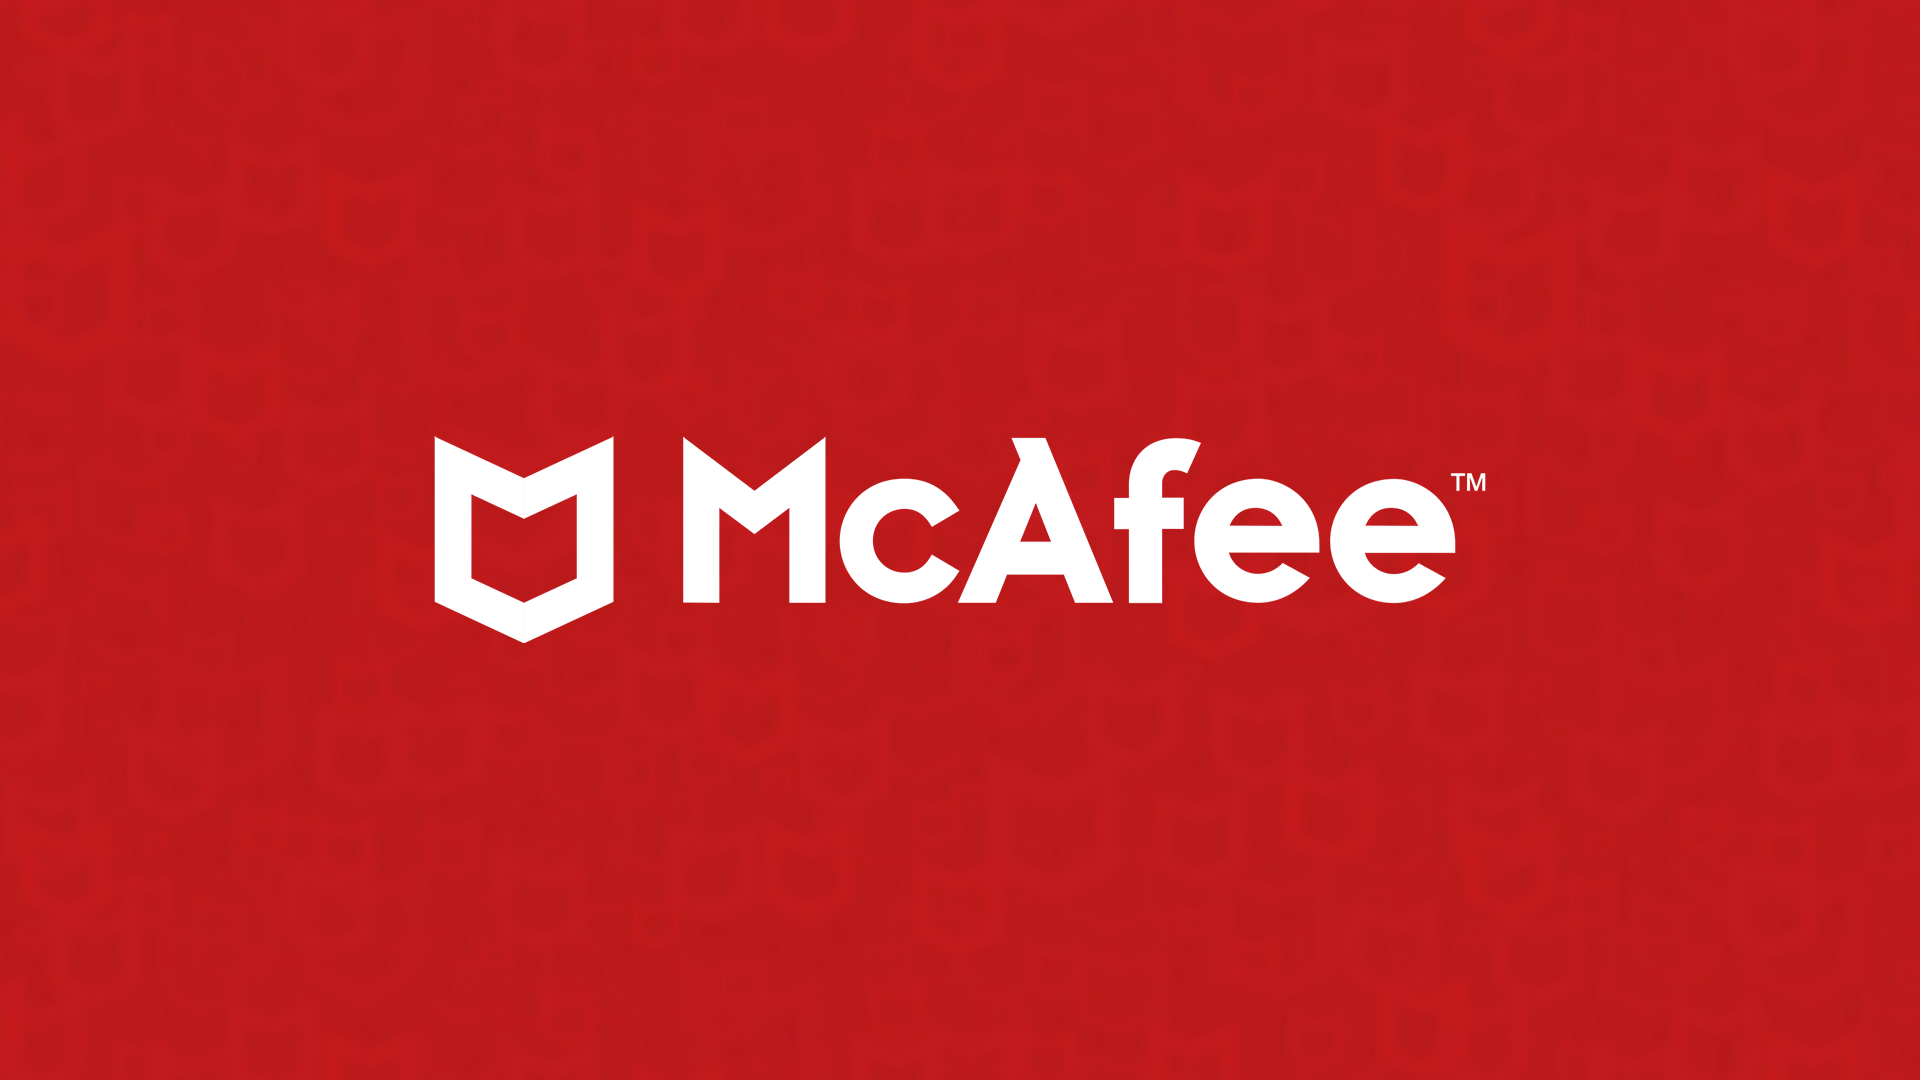 McAfee Webinar Security for Flexible Working Environments